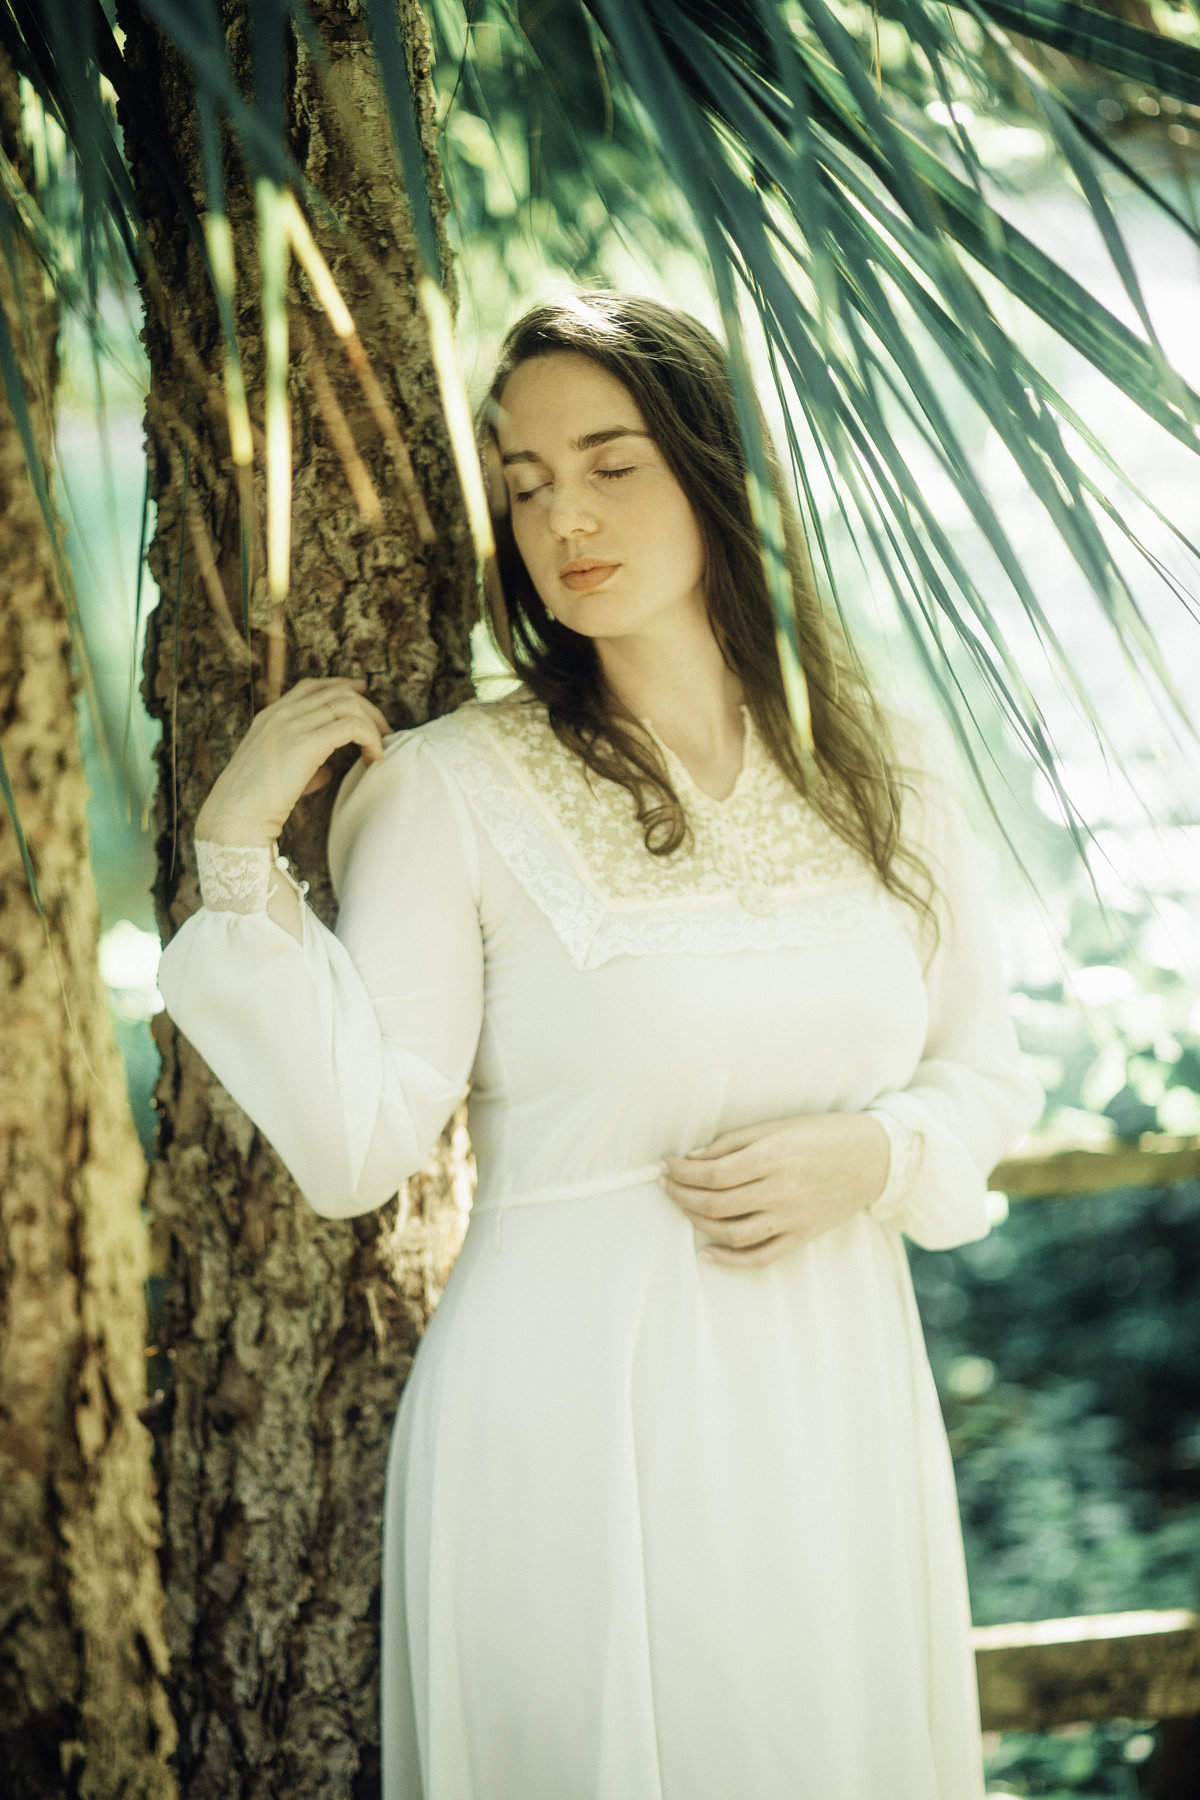 Portrait Photo Of Young Woman In White Dress Leaning At a Tree Los Angeles